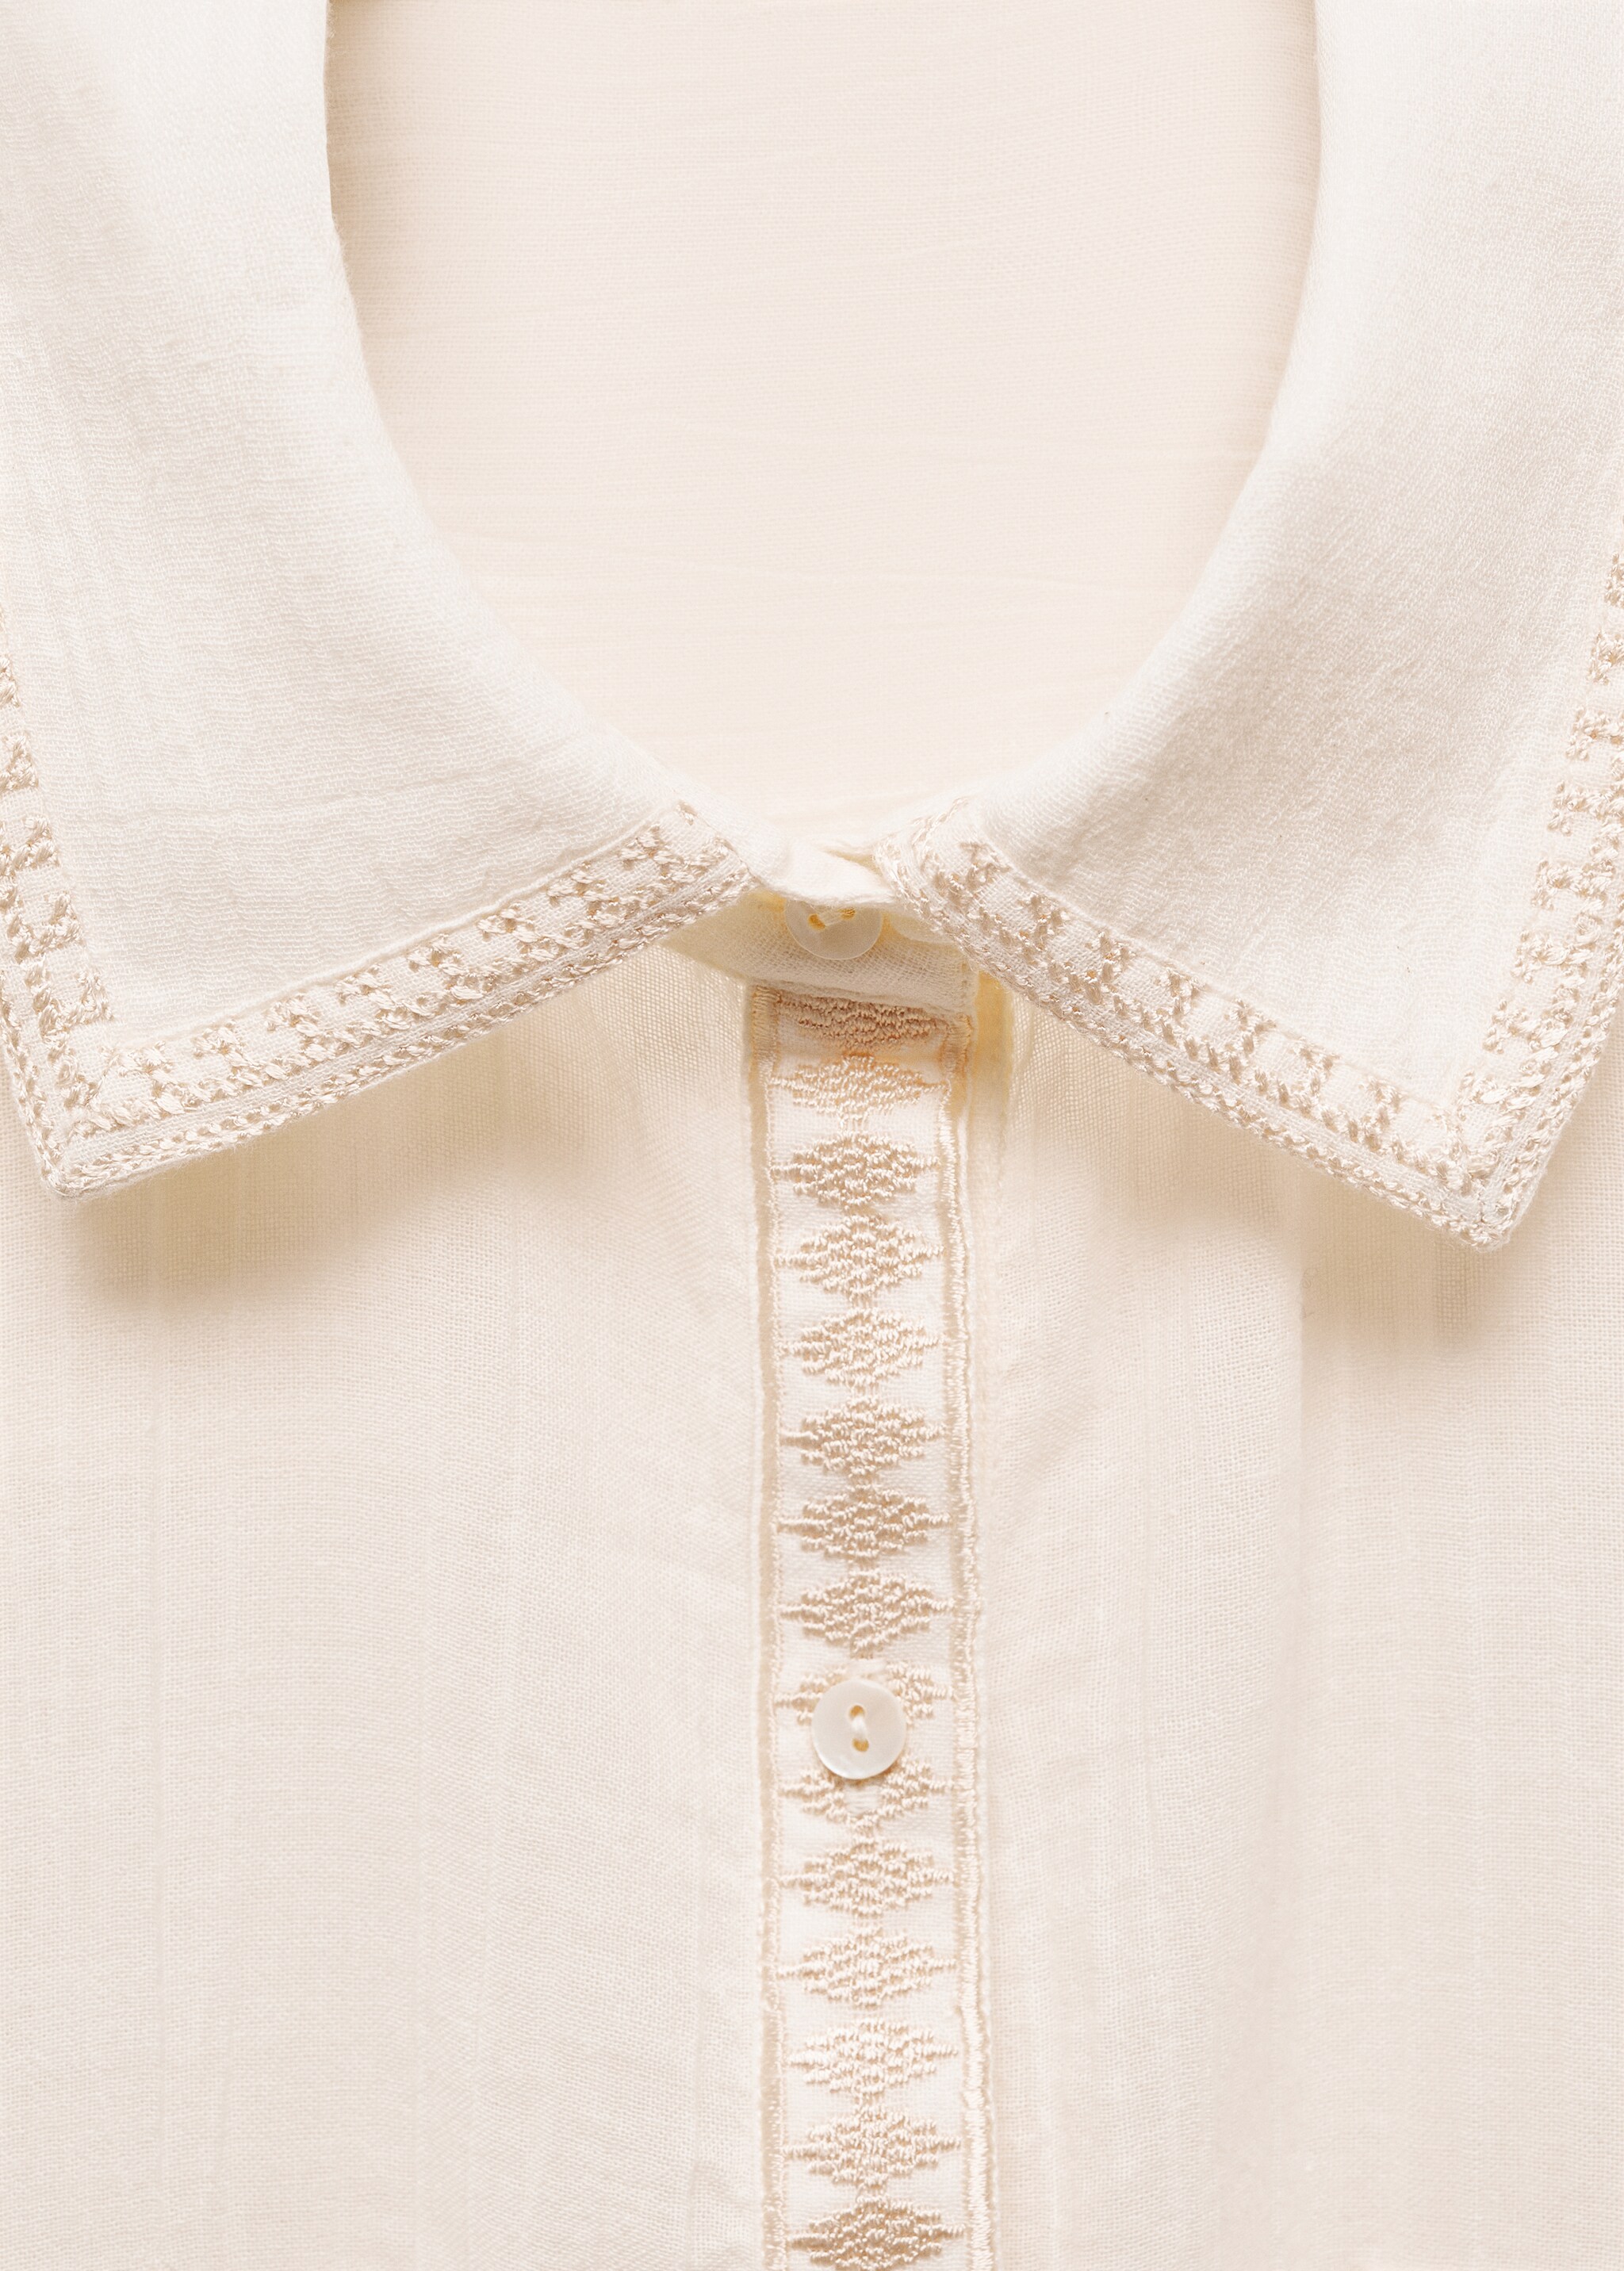 Cotton shirt with embroidery detail - Details of the article 8